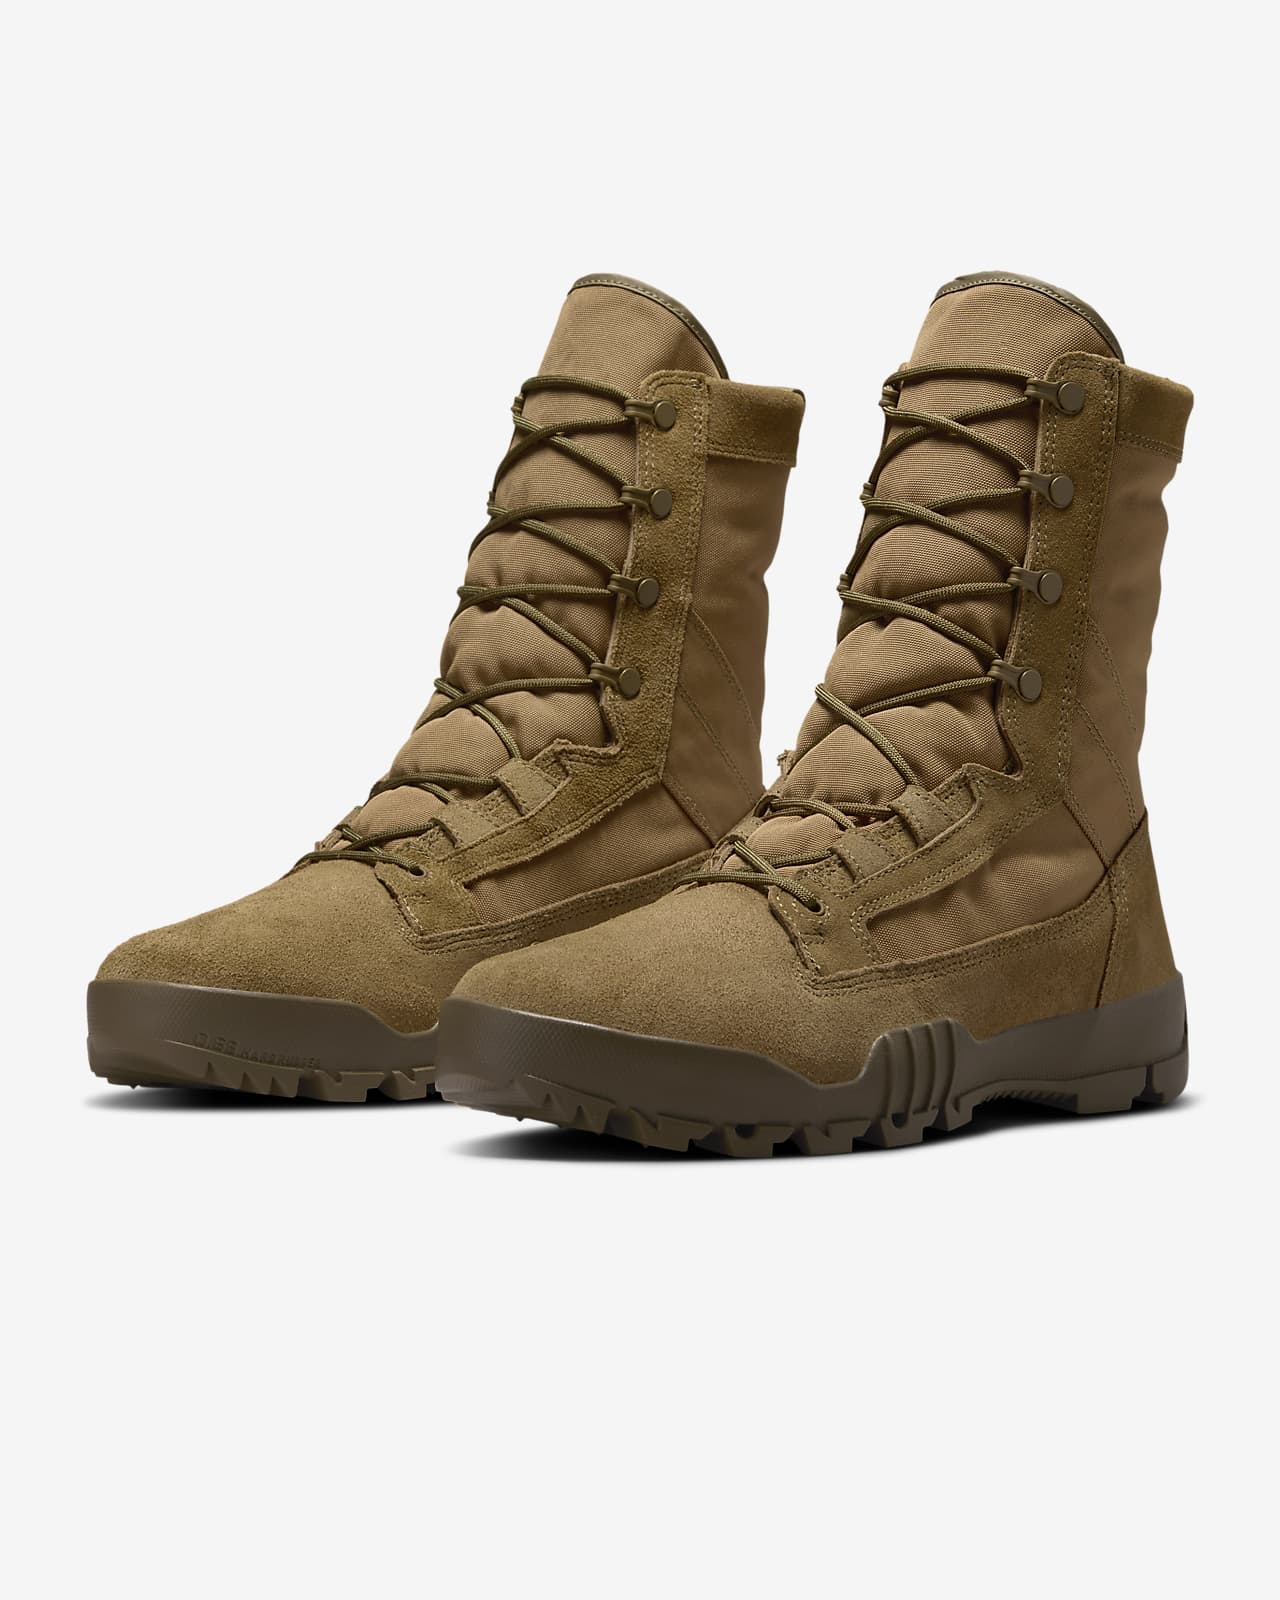 traagheid Martin Luther King Junior verdwijnen Nike SFB Jungle 8" Leather Tactical Boots. Nike.com